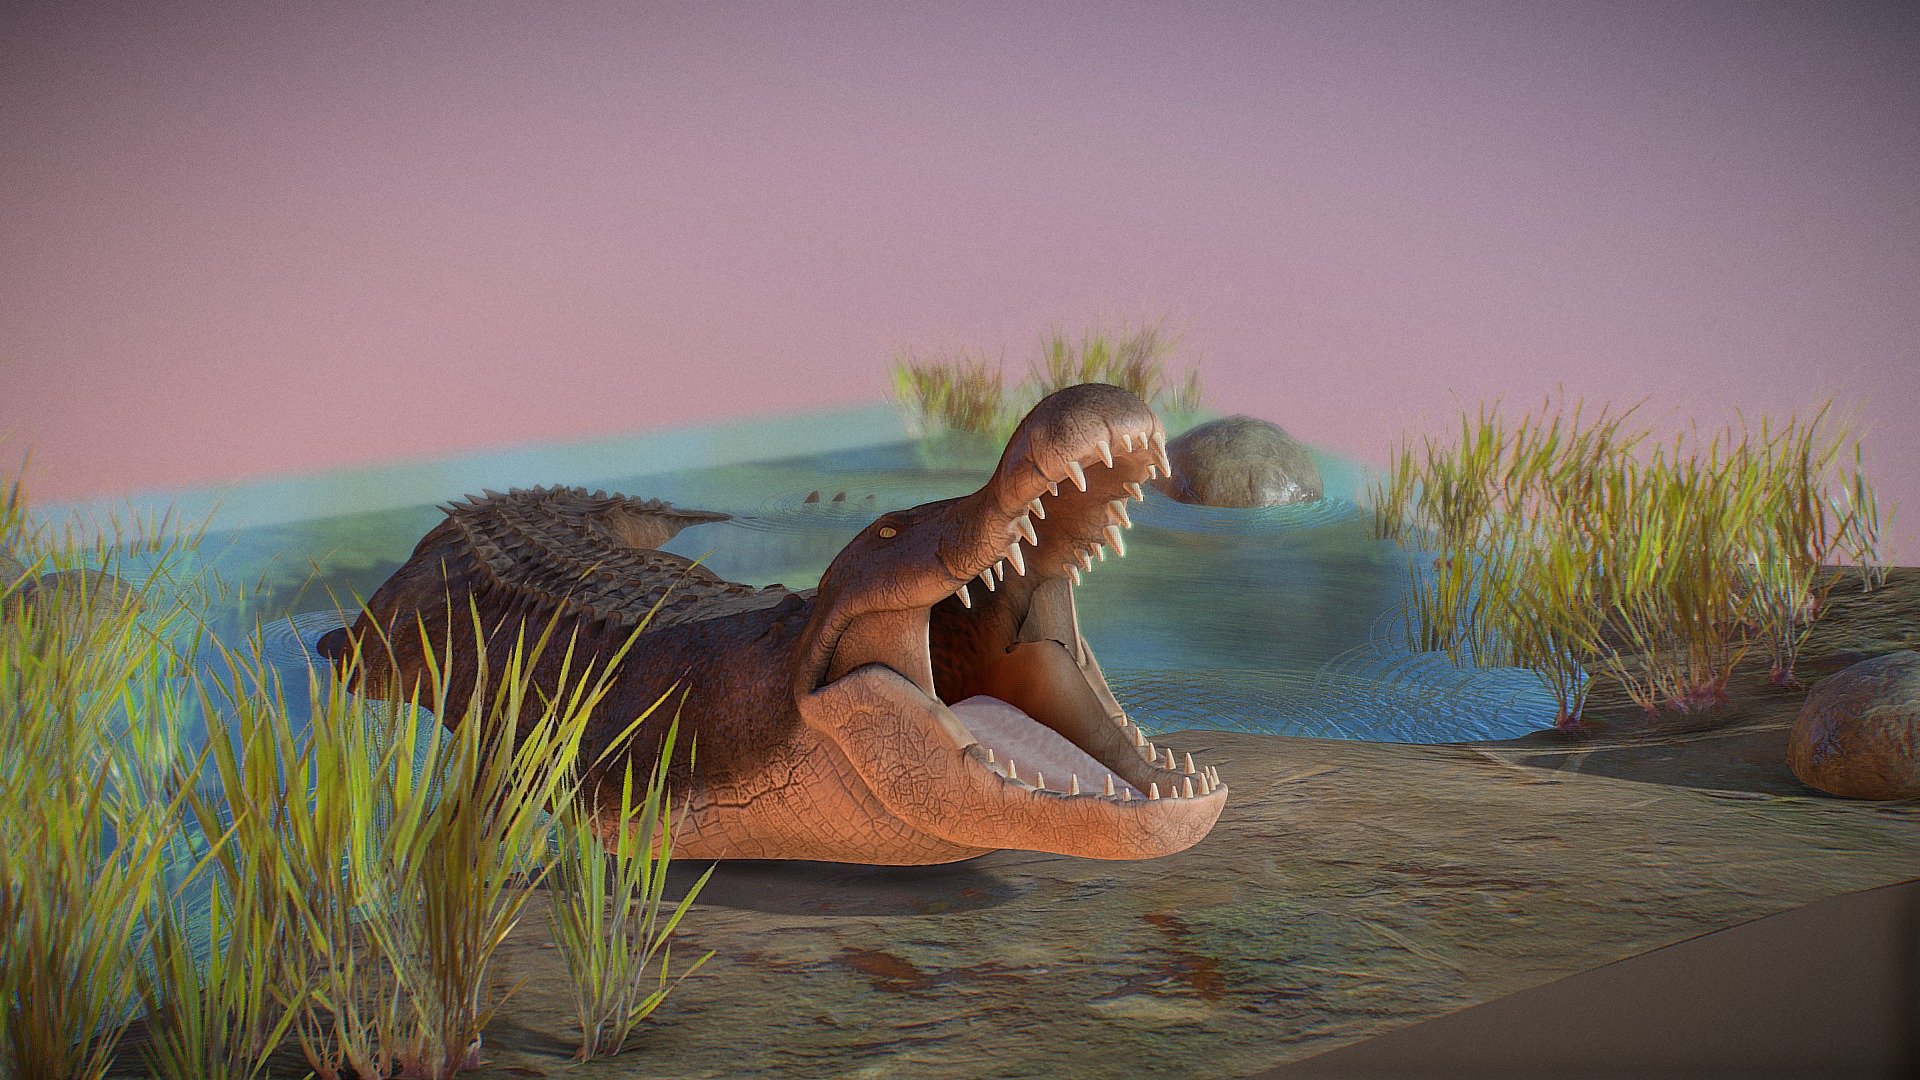 Character made in blender and zbrush - Alligator - 3D model by Danny Escobar Castro (@NOTTIME) 3d model